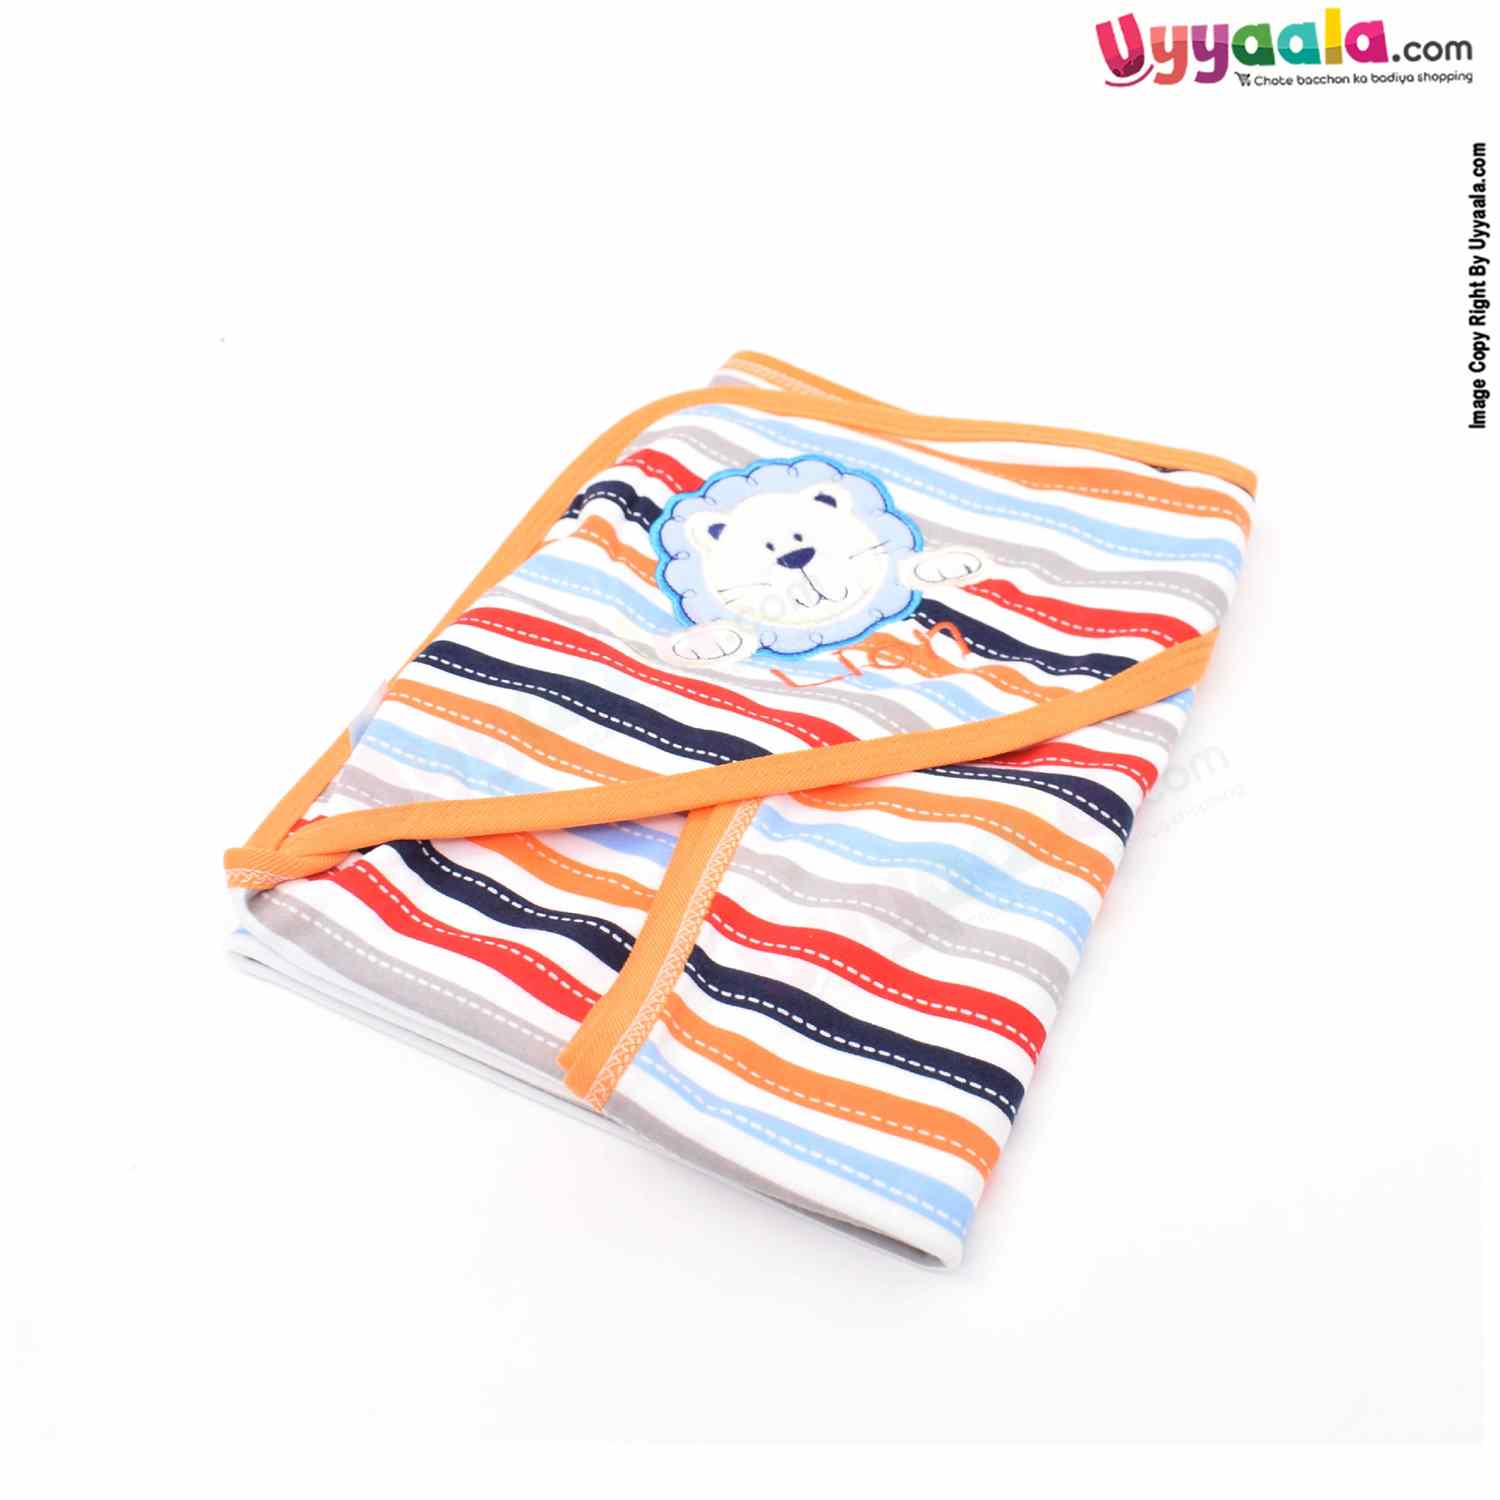 Cotton Hosiery Hooded Towel for Babies with Floral Print 1pc 0+m Age, Size (73*69Cm)- MultiColor